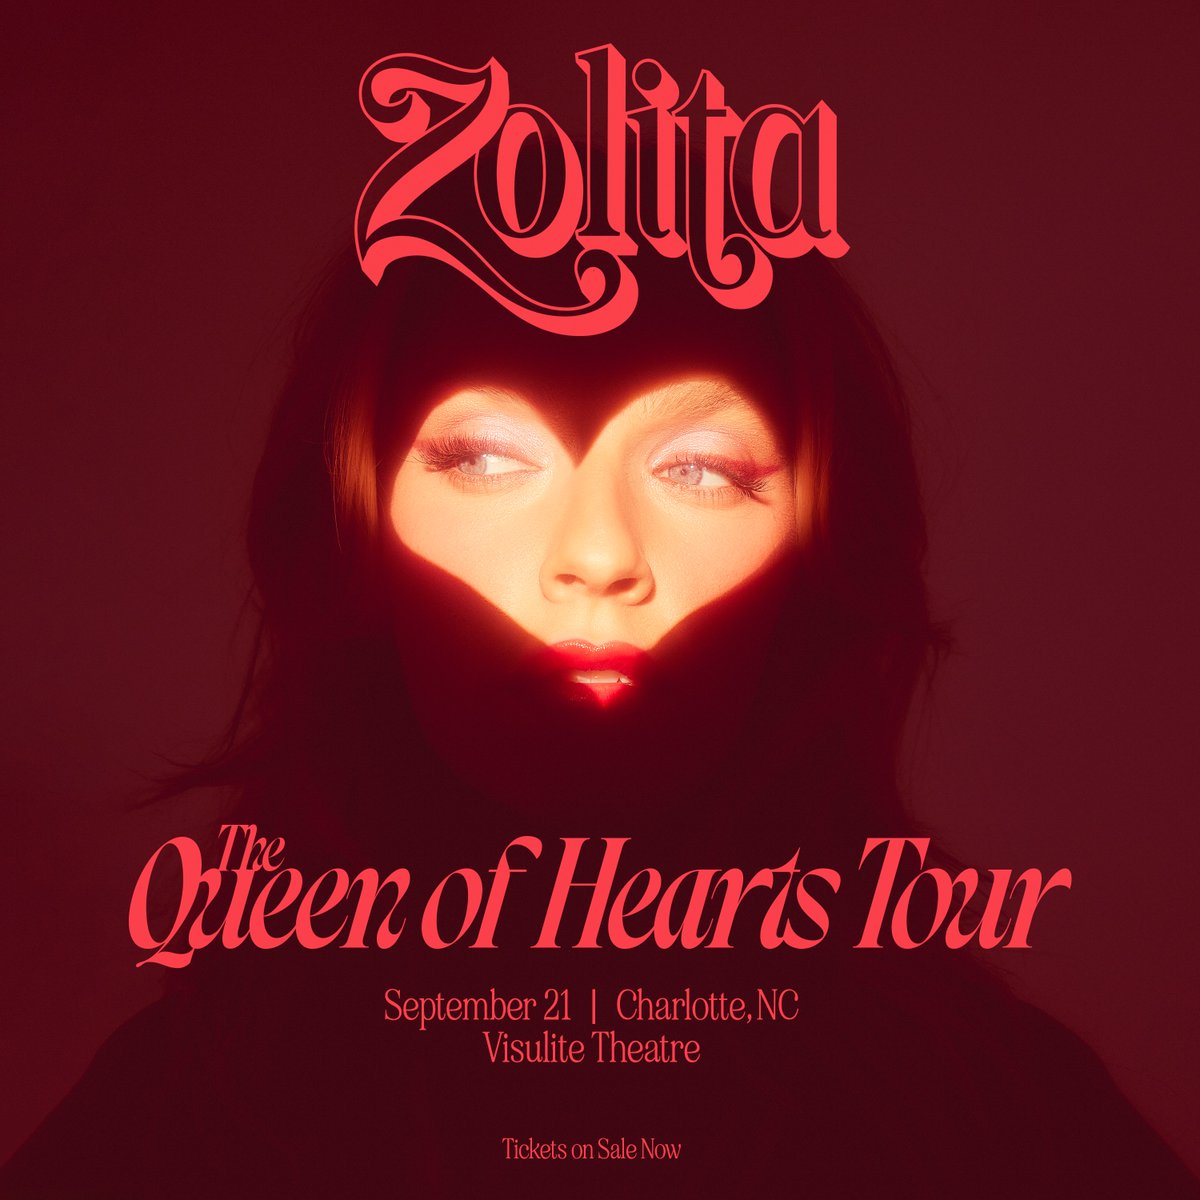 ANNOUNCING 9/21 @zolitaofficial will be performing LIVE at the @VisuliteTheatre in Charlotte, NC! ON SALE FRIDAY 10 am 👇 visulite.com/shows/details/…